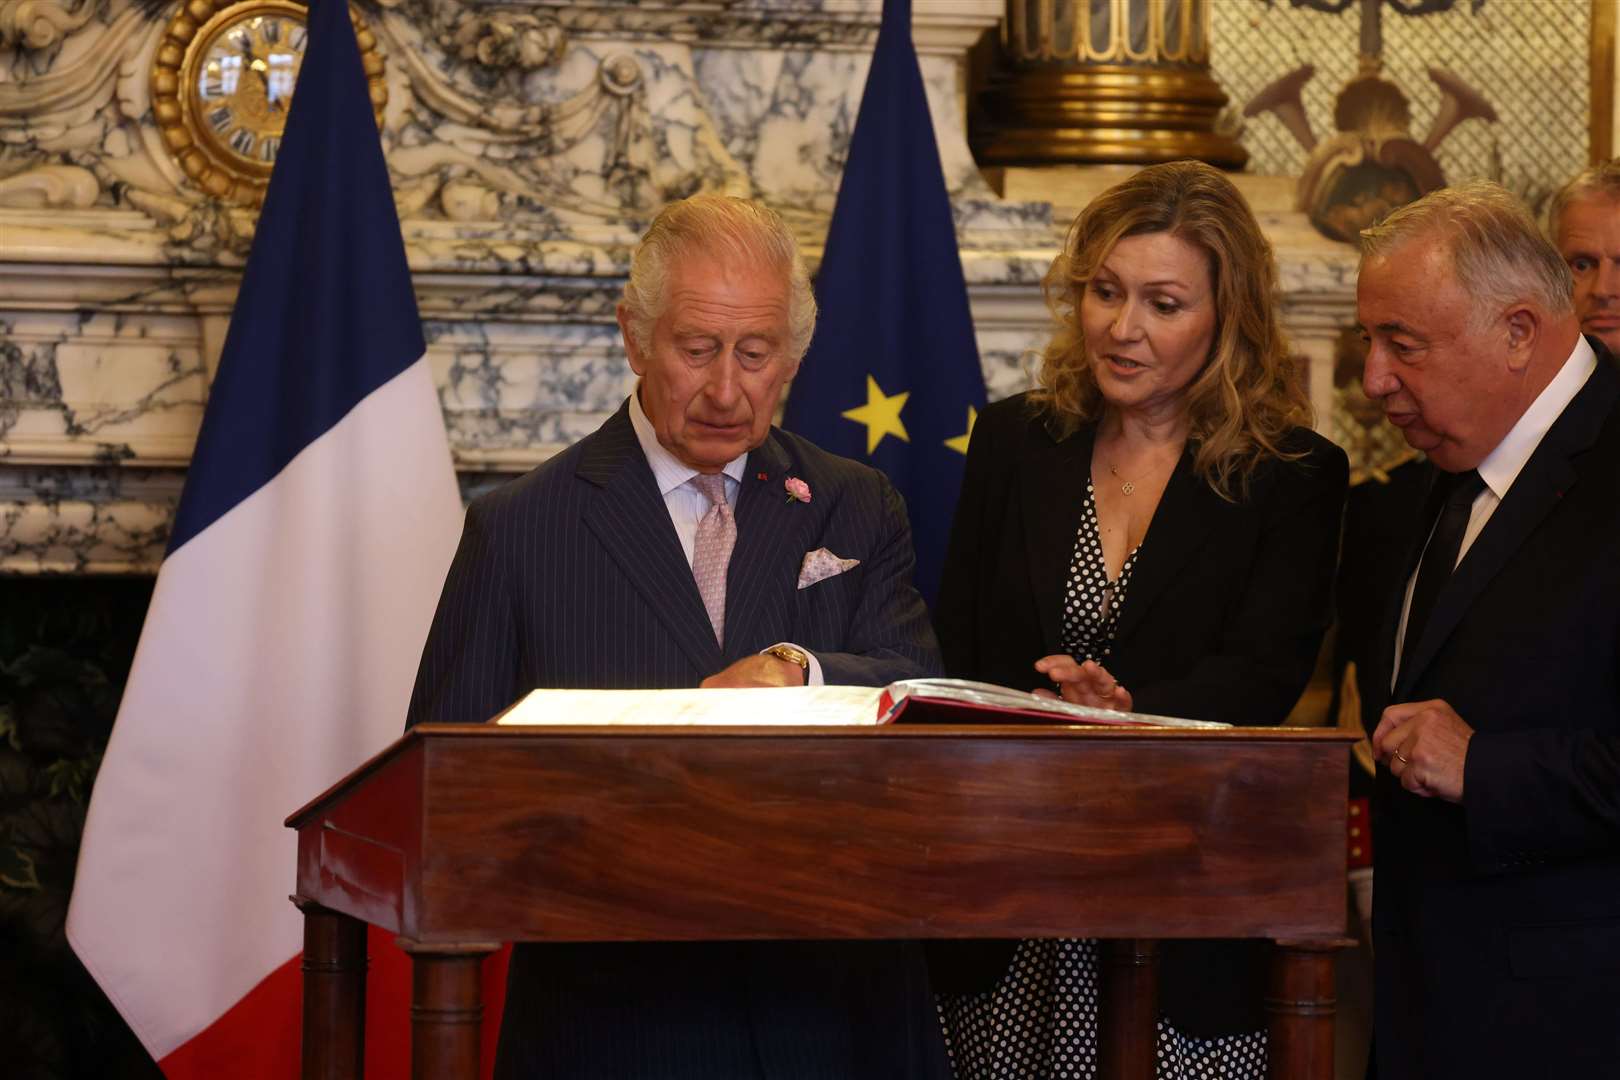 The King, with the President of the Senate Gerard Larcher and the National Assembly President Yael Braun-Pivet, signing the visitors book (Ian Vogler/Daily Mirror/PA)